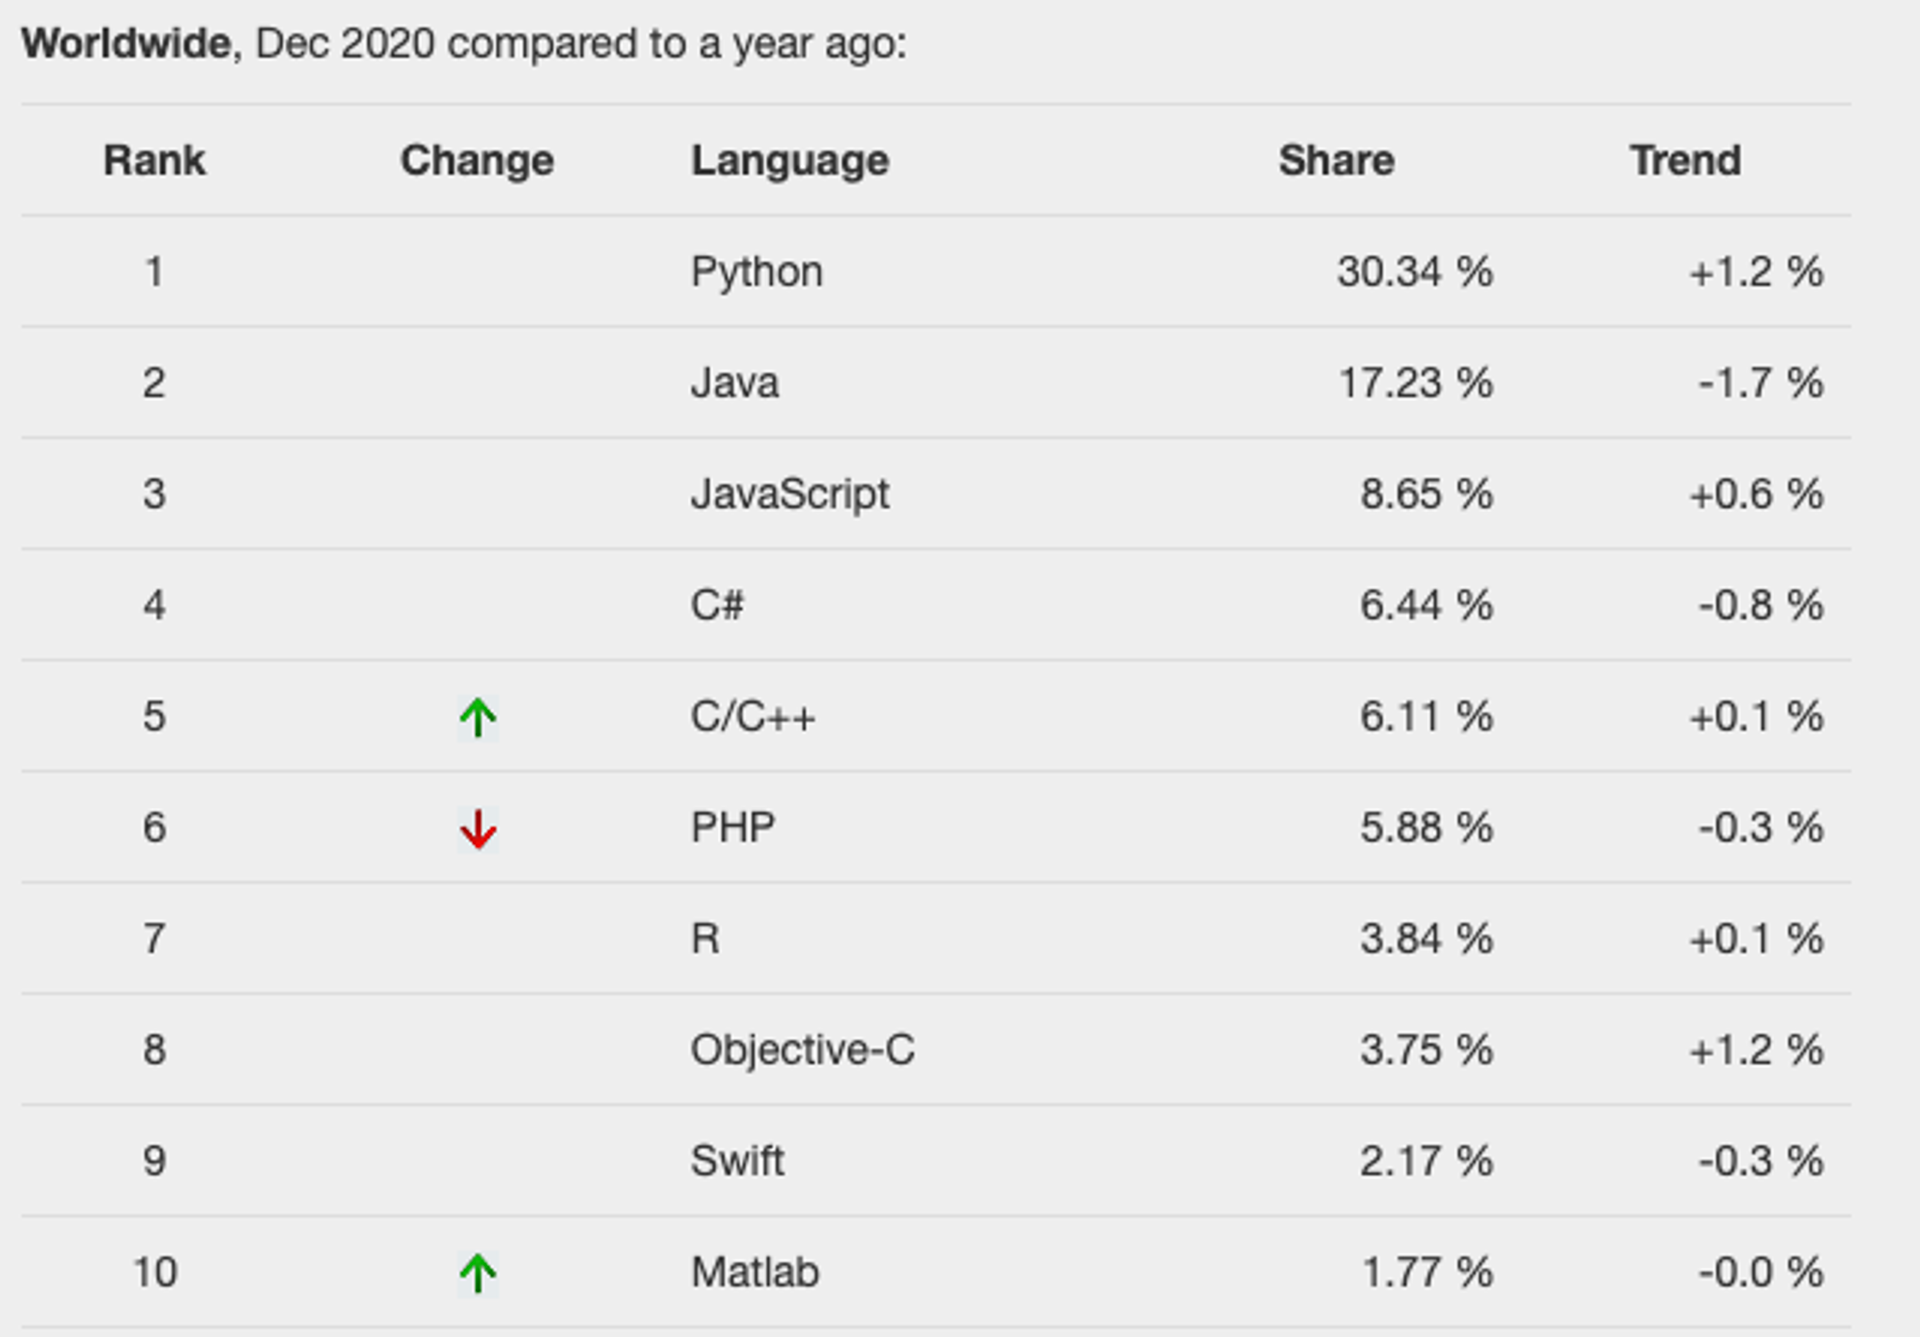 Table showing shifts in marketshare of popular data science programming languages